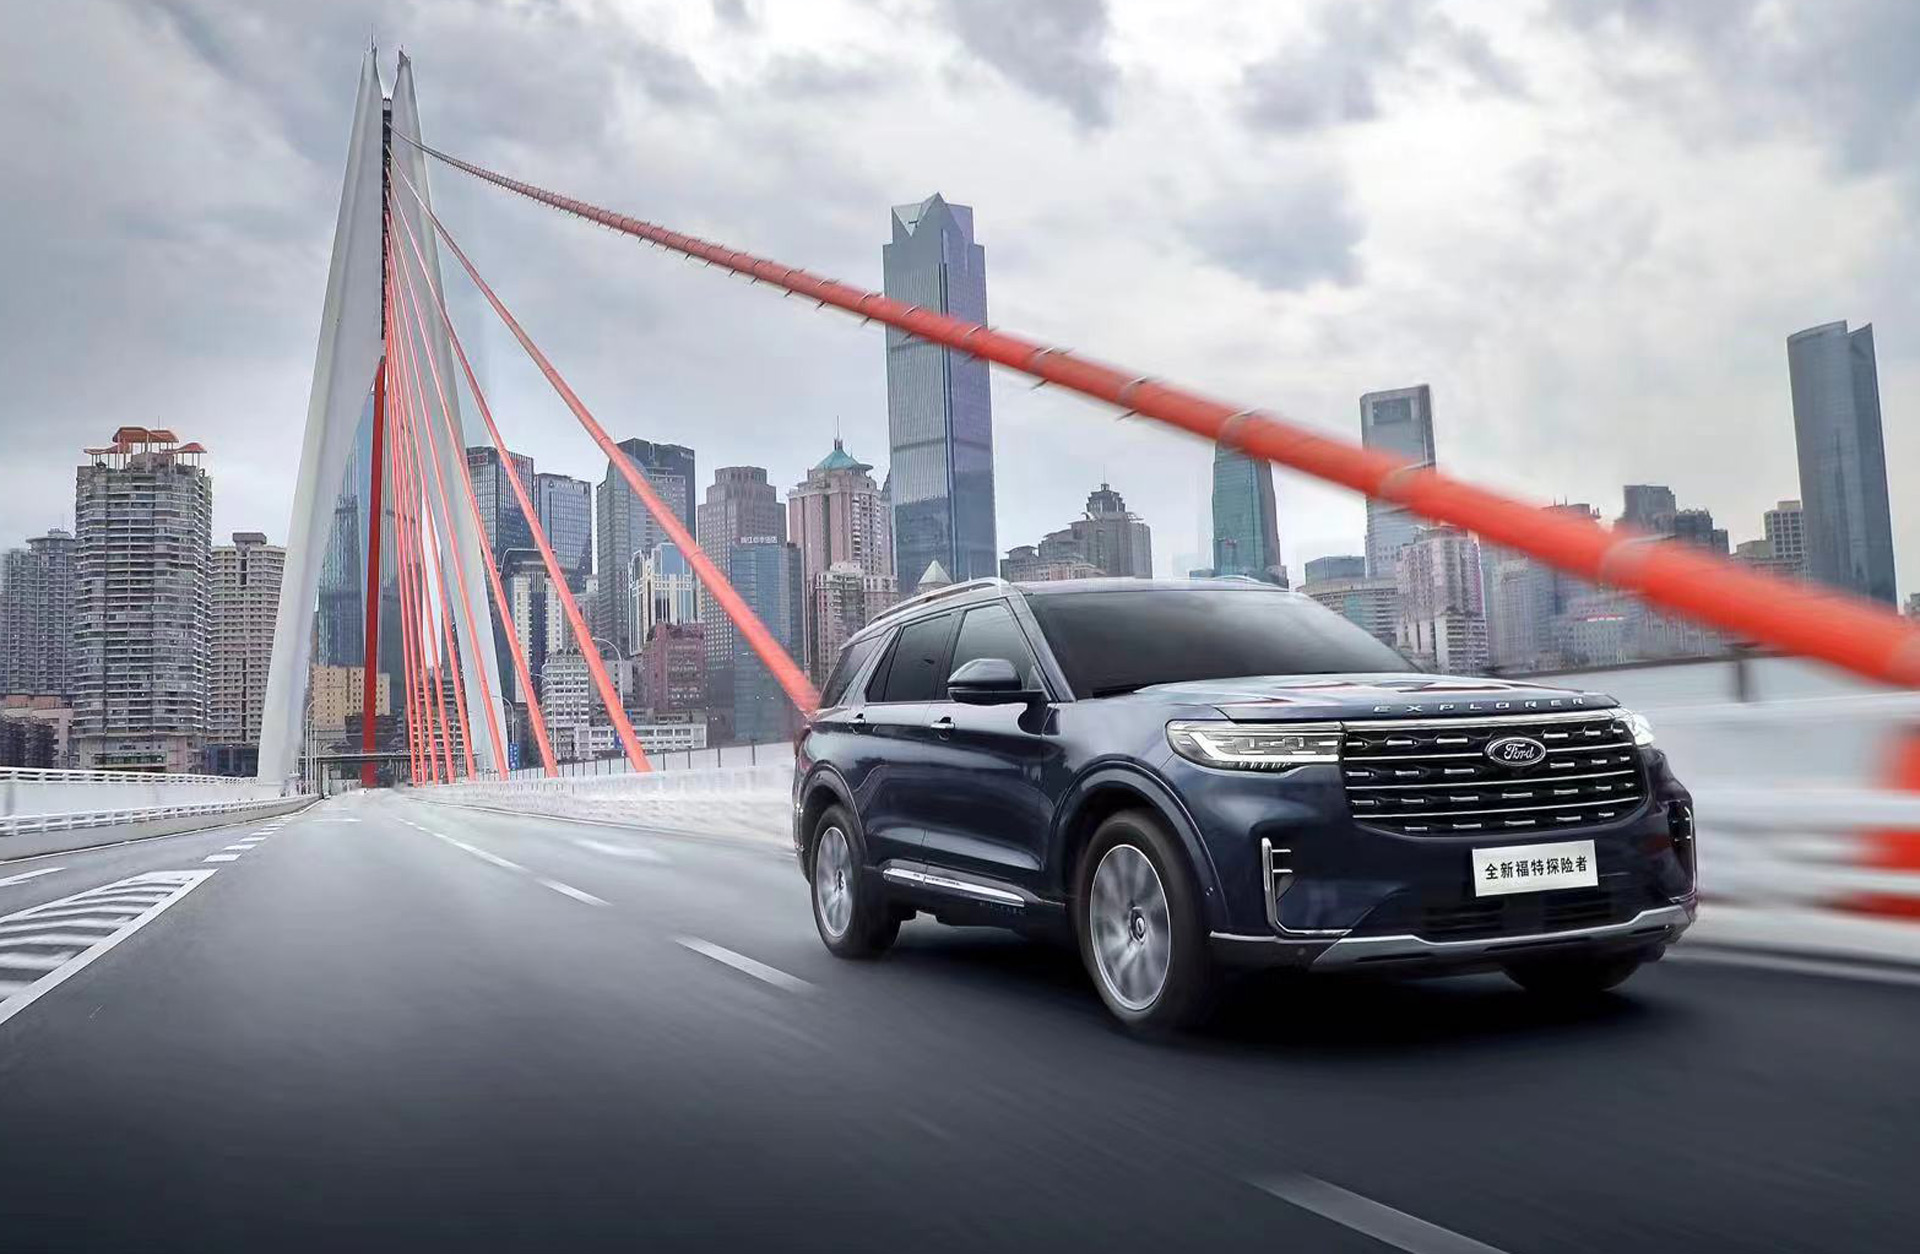 1659613600 Ford Explorer receives new look 27 inch touchscreen in China